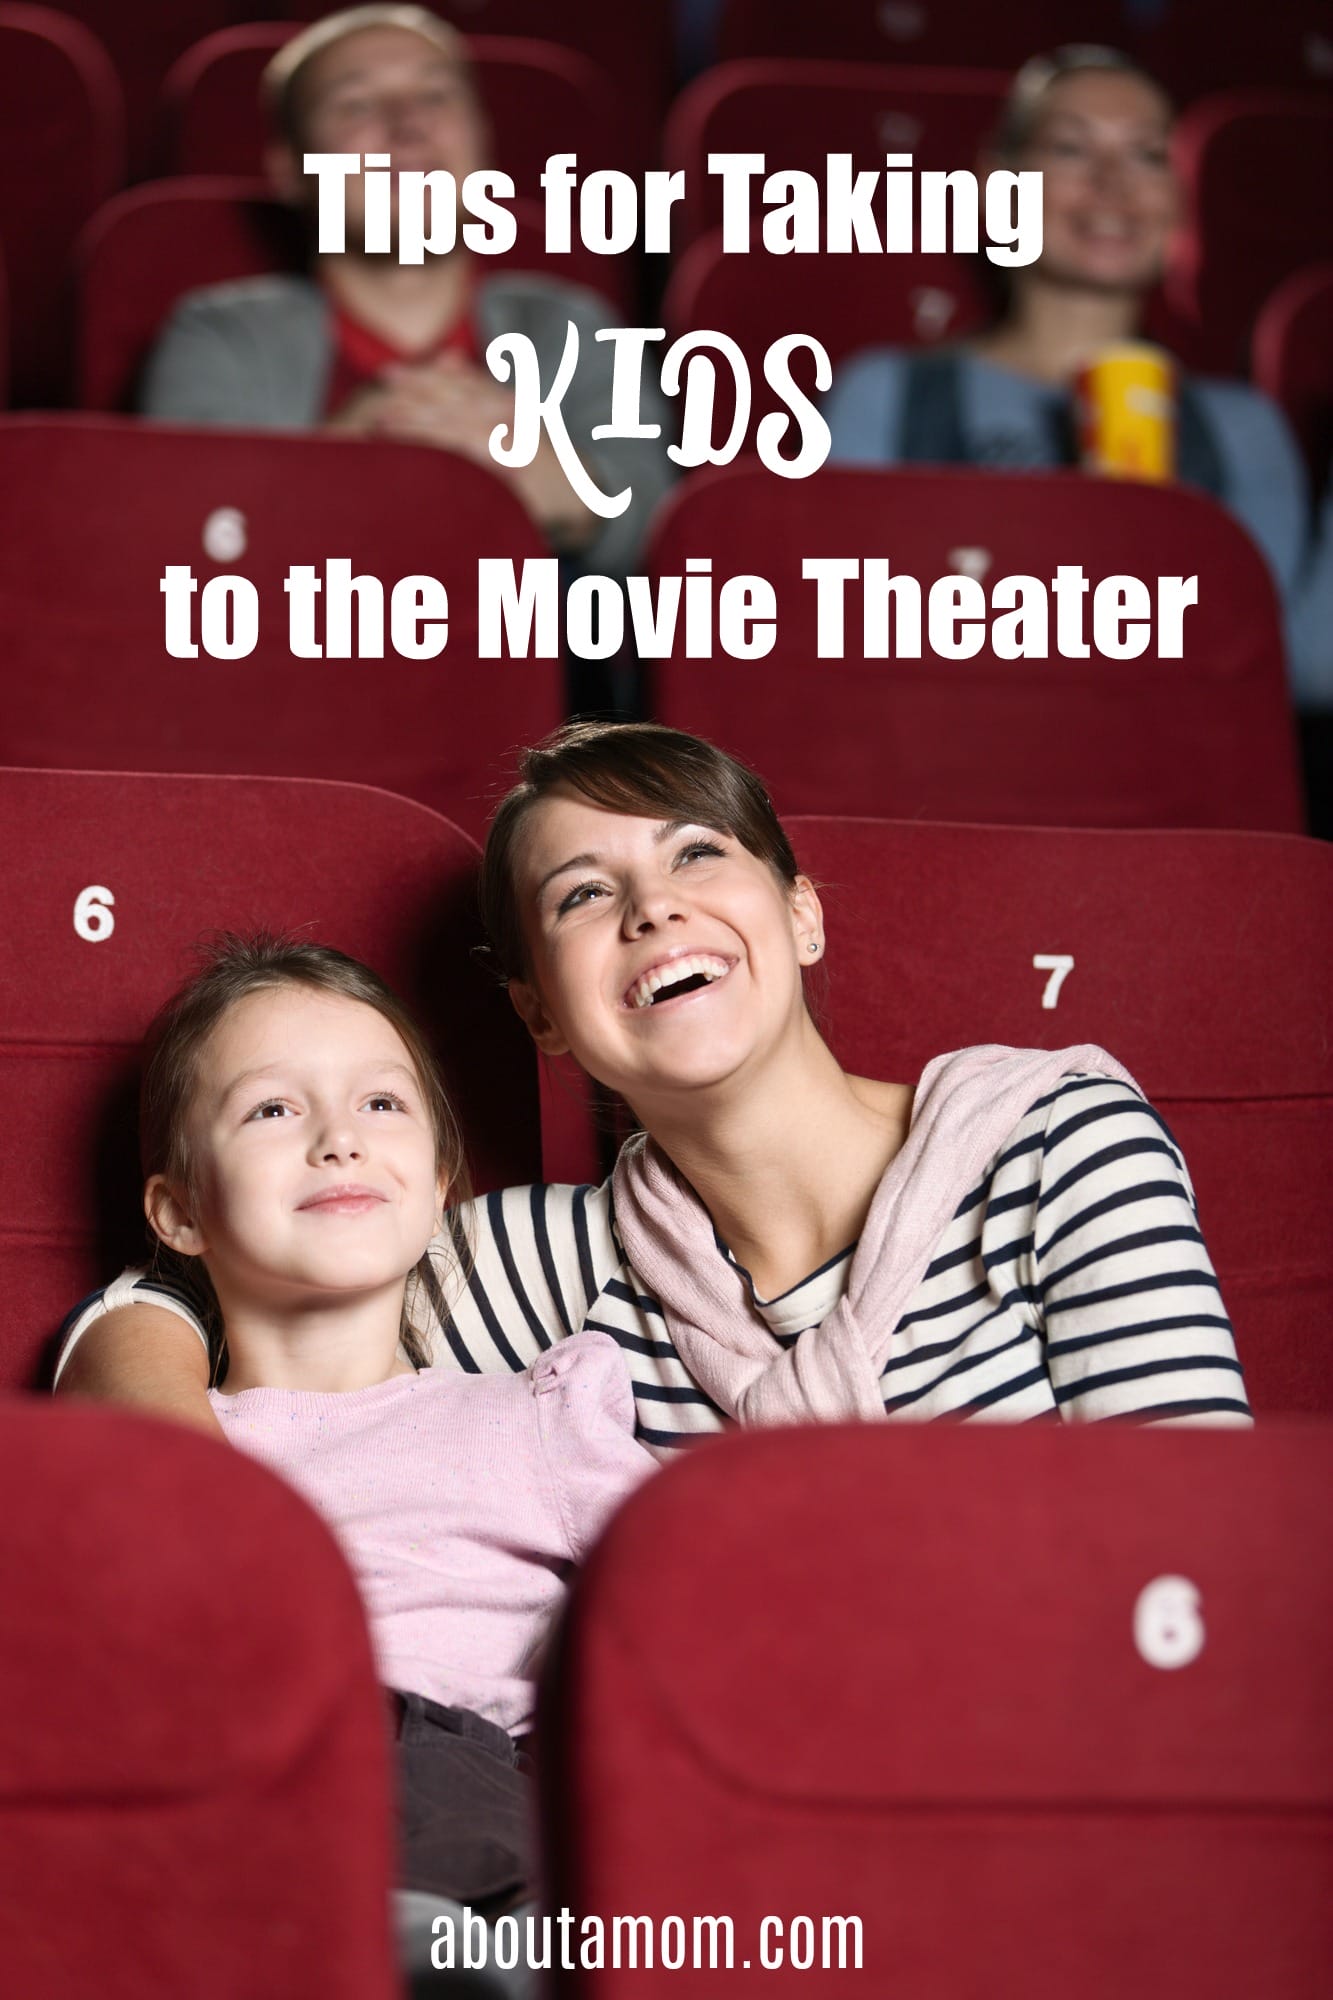 Children love going to the movies, but how will you know if they are ready? Here are 10 tips for taking kids to the movie theater.